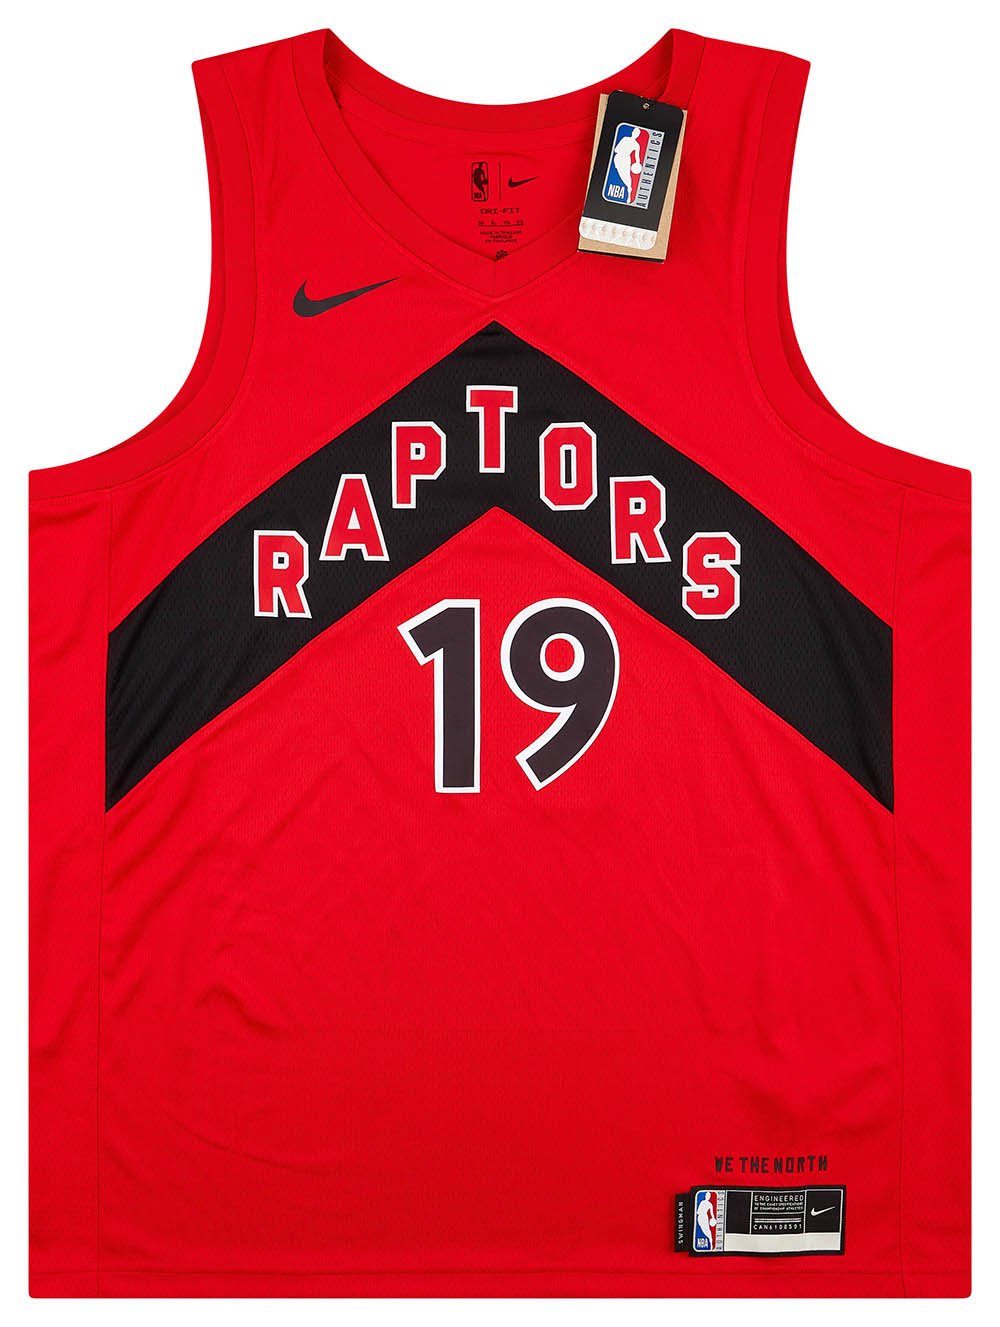 What's in a jersey? The stories behind the Raptors' numbers - Raptors HQ